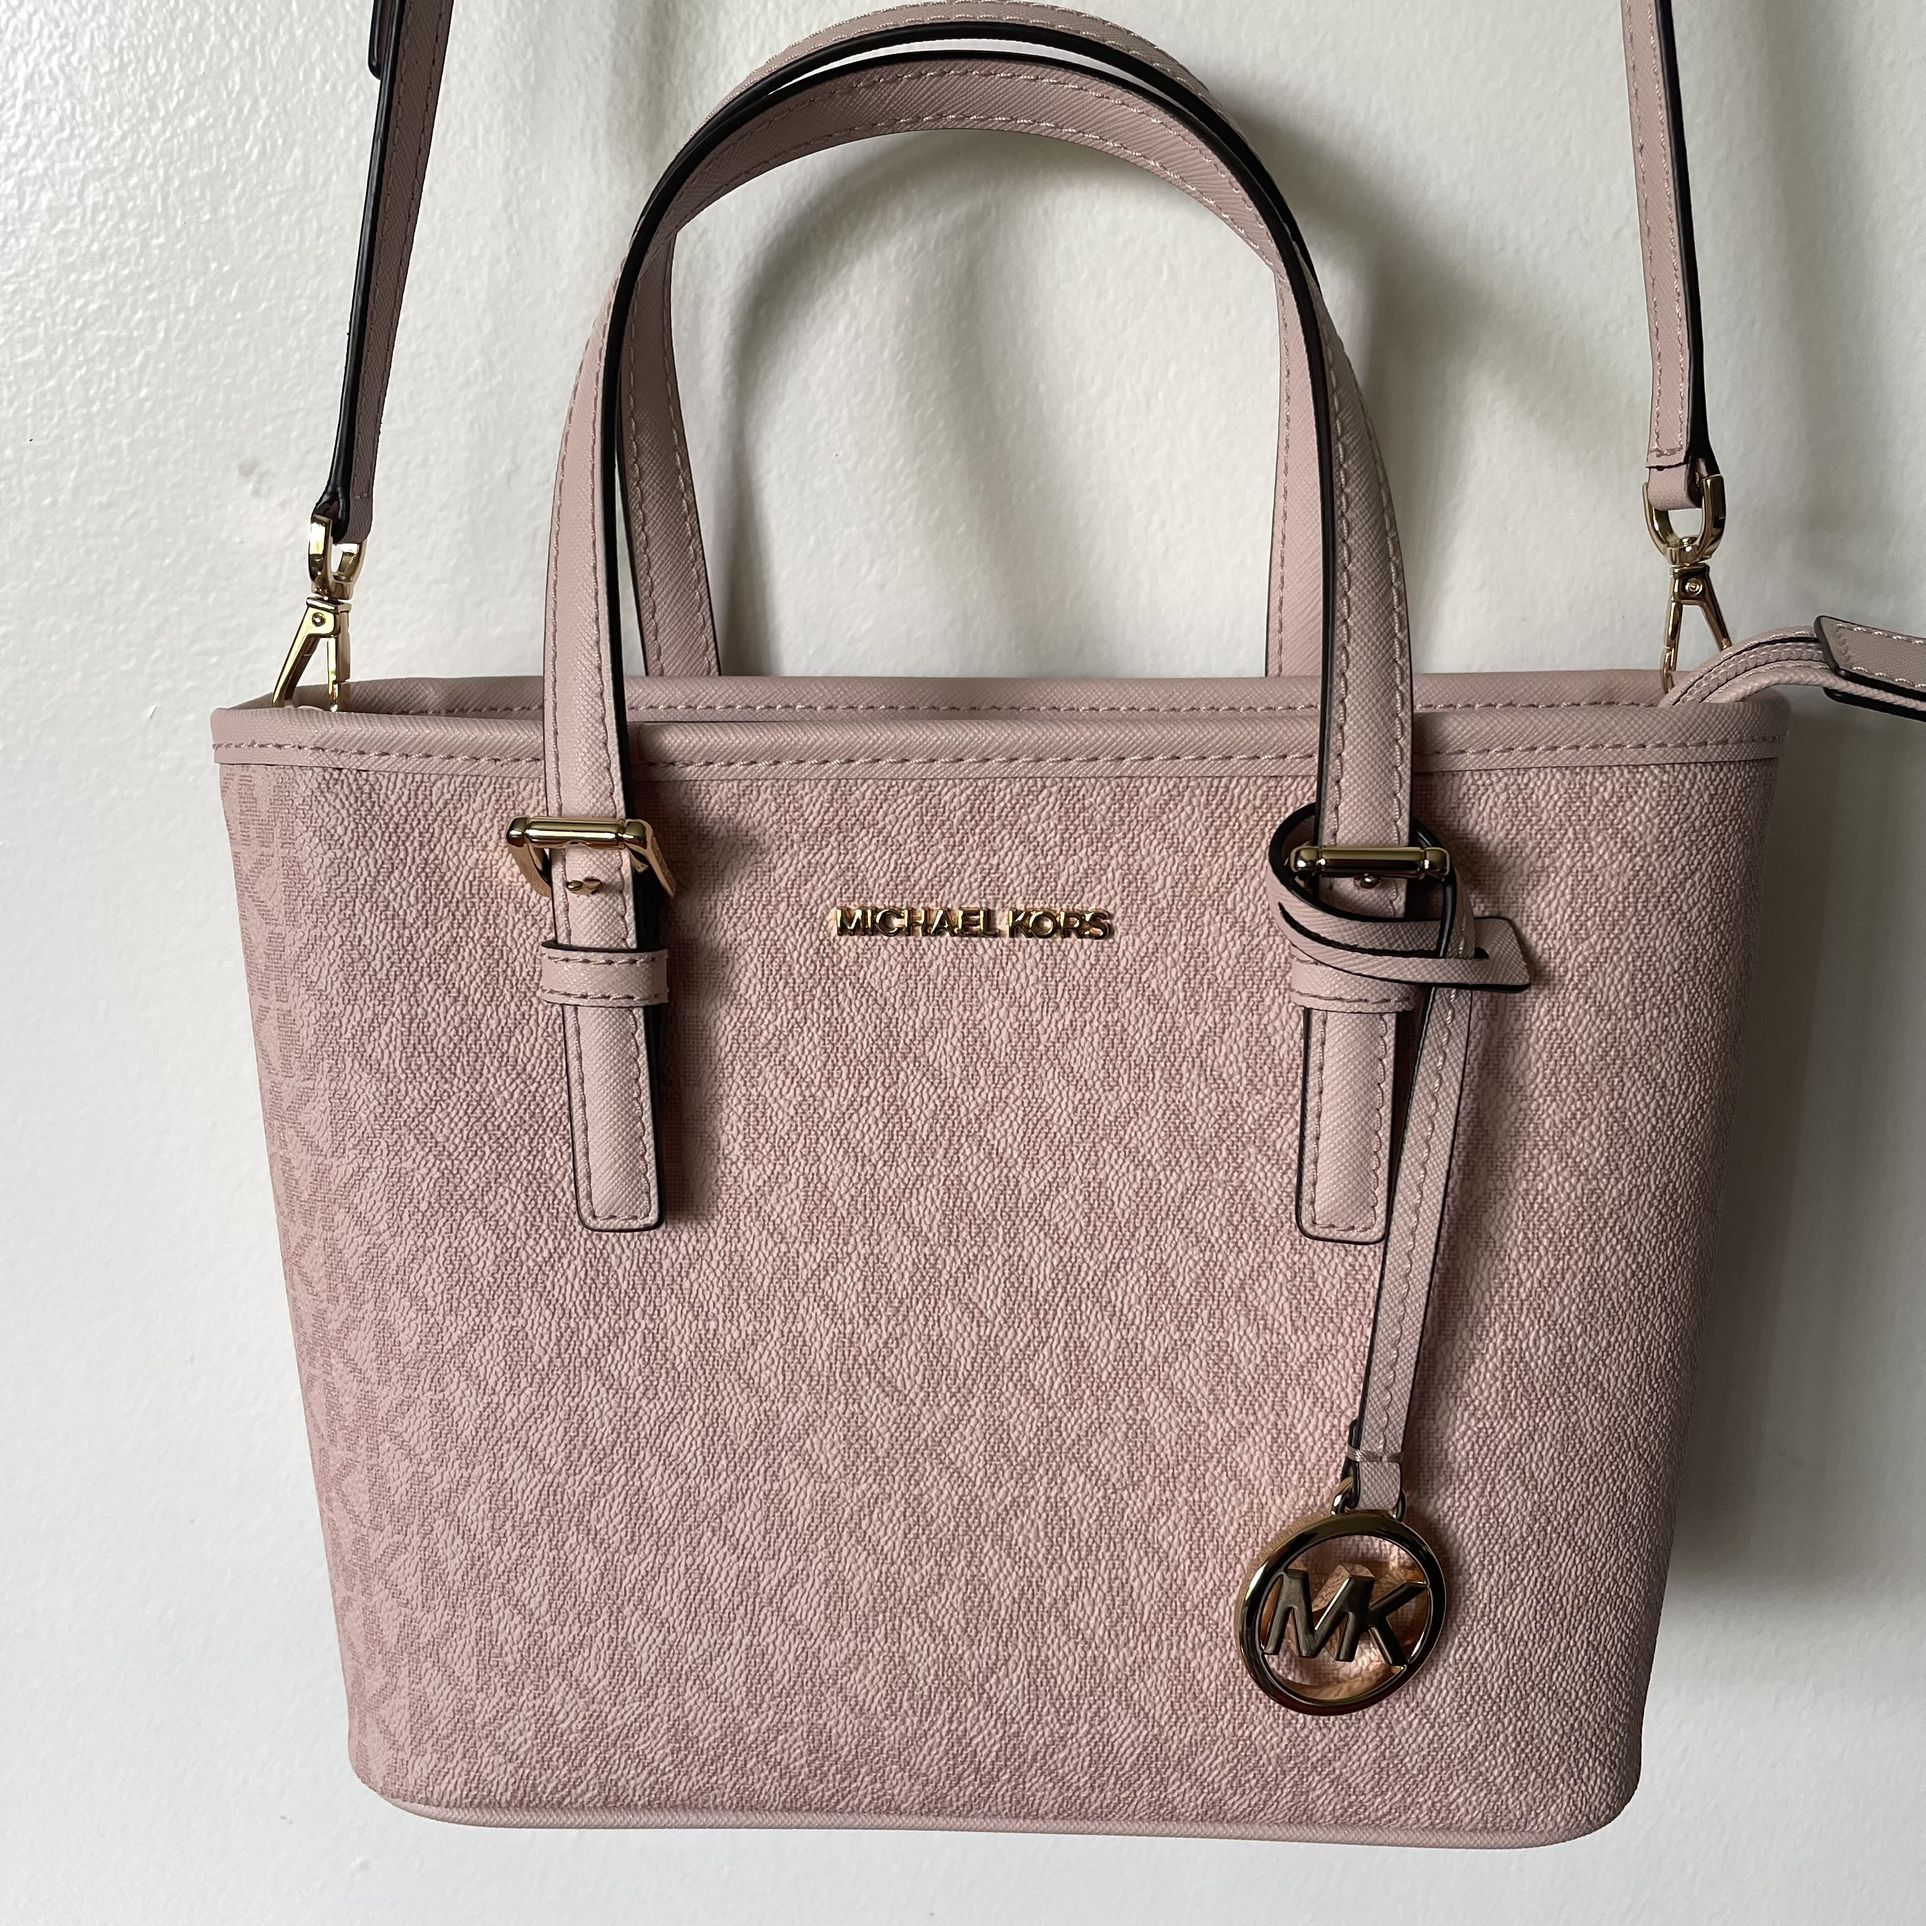 MICHAEL KORS Signature Logo Canvas Tote Tan Brown for Sale in Winton, CA -  OfferUp